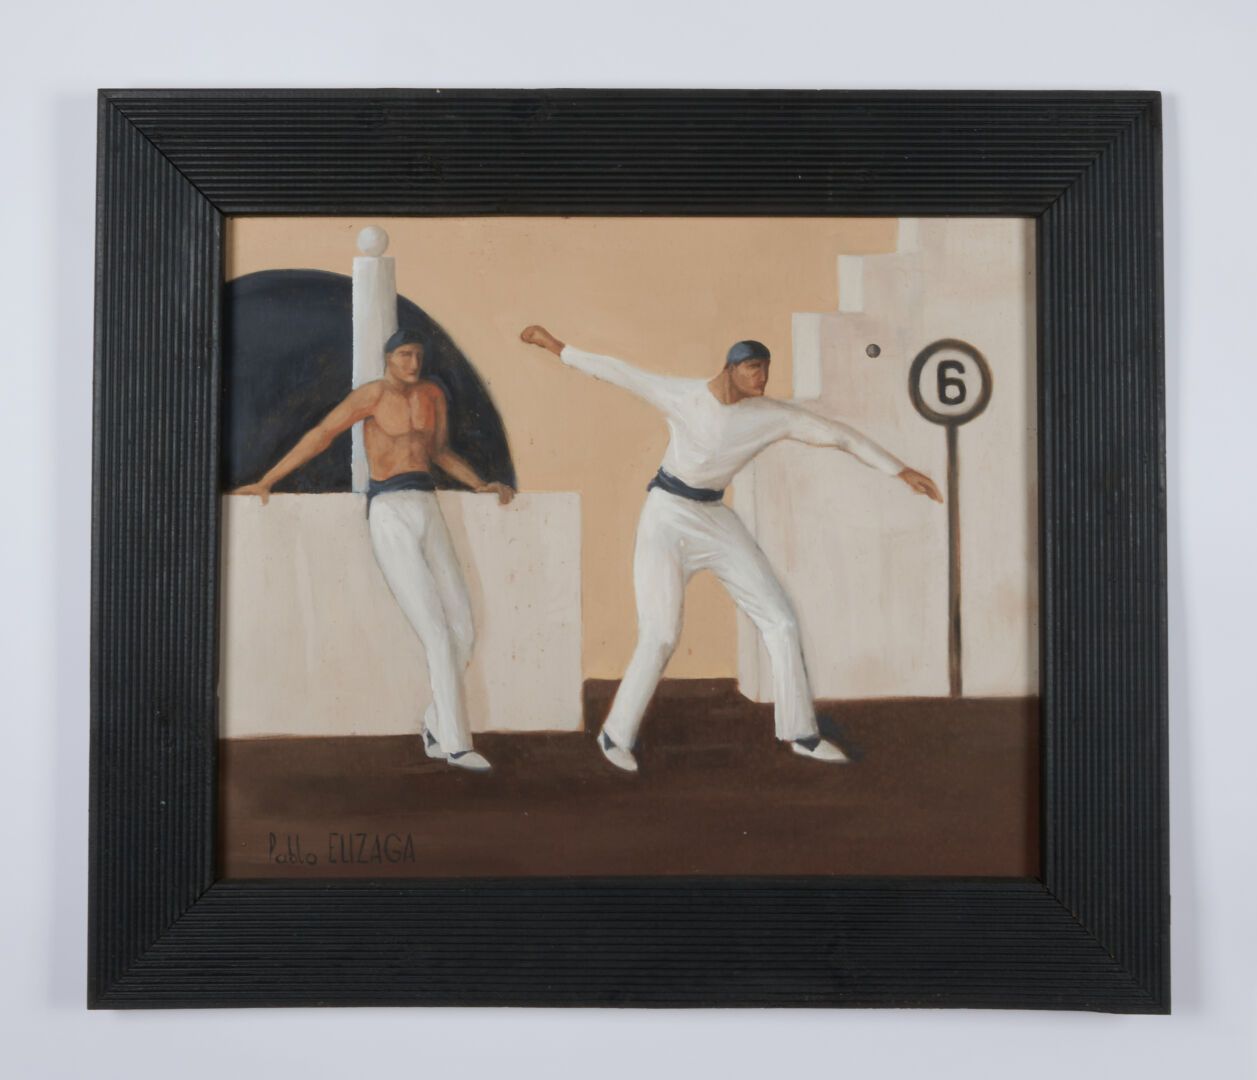 Null ELIZAGA Pablo (born in 1967) 

"The pelota game" oil on panel signed lower &hellip;